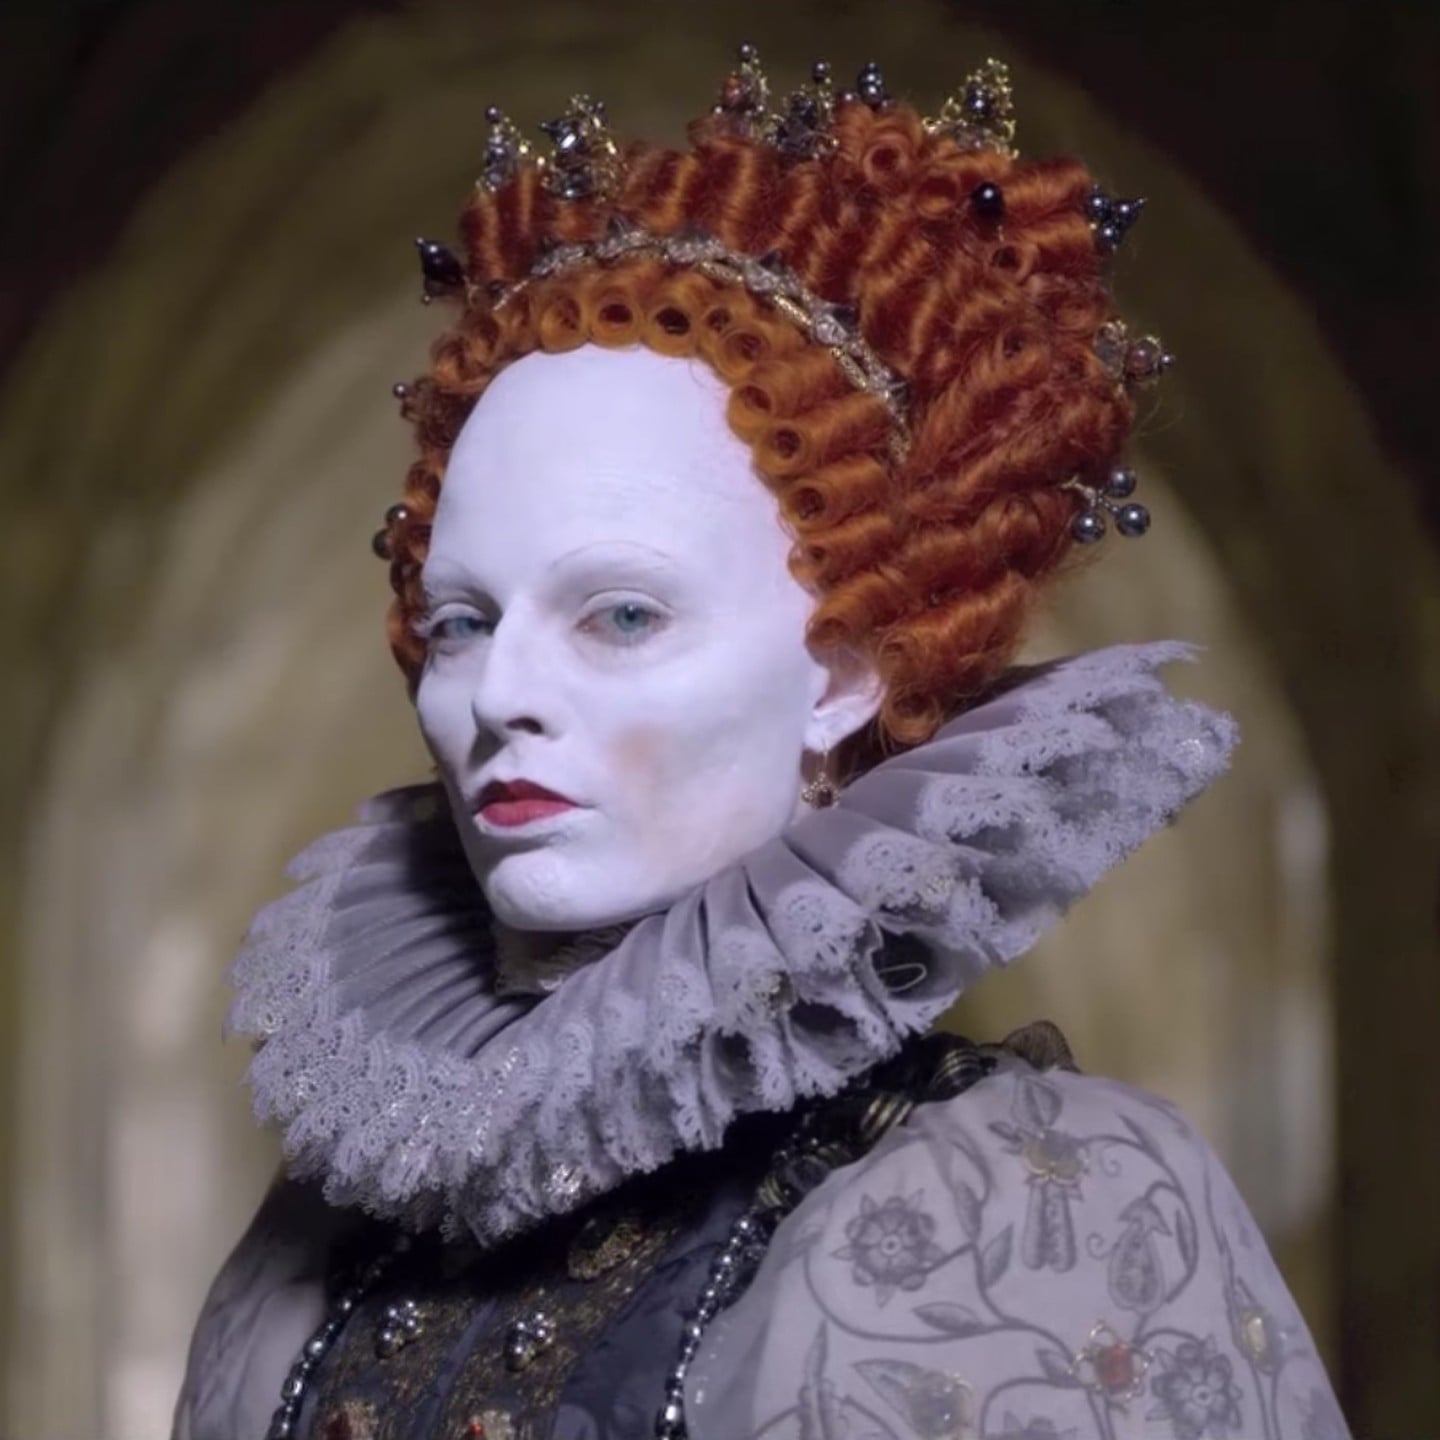 Tea at Trianon: Trailer for New Film about Mary Queen of Scots